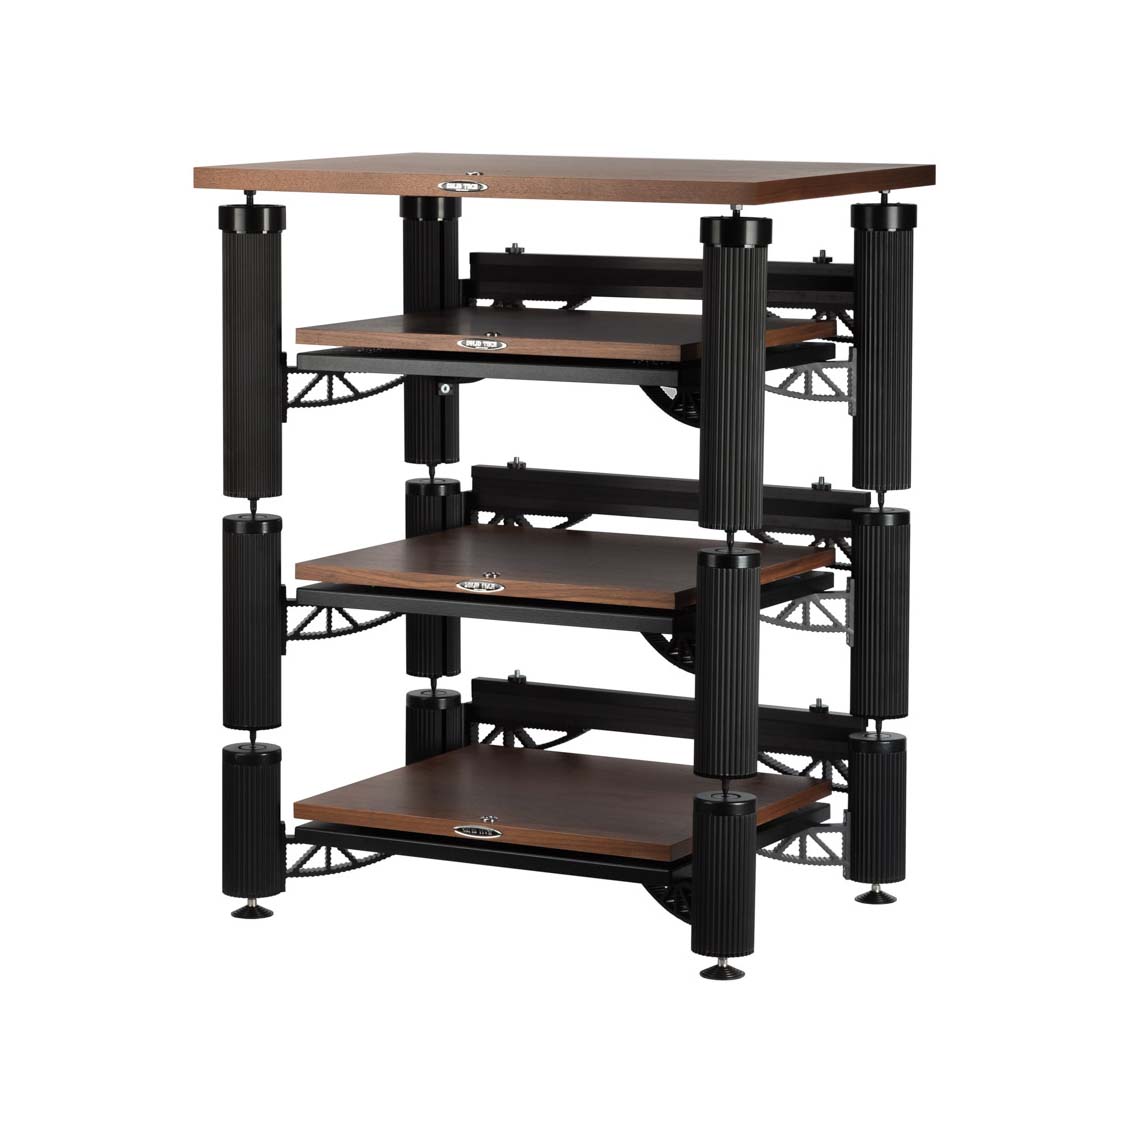 3 isolation shelf-kit design with top shelf and cable carriers in black/walnut main image